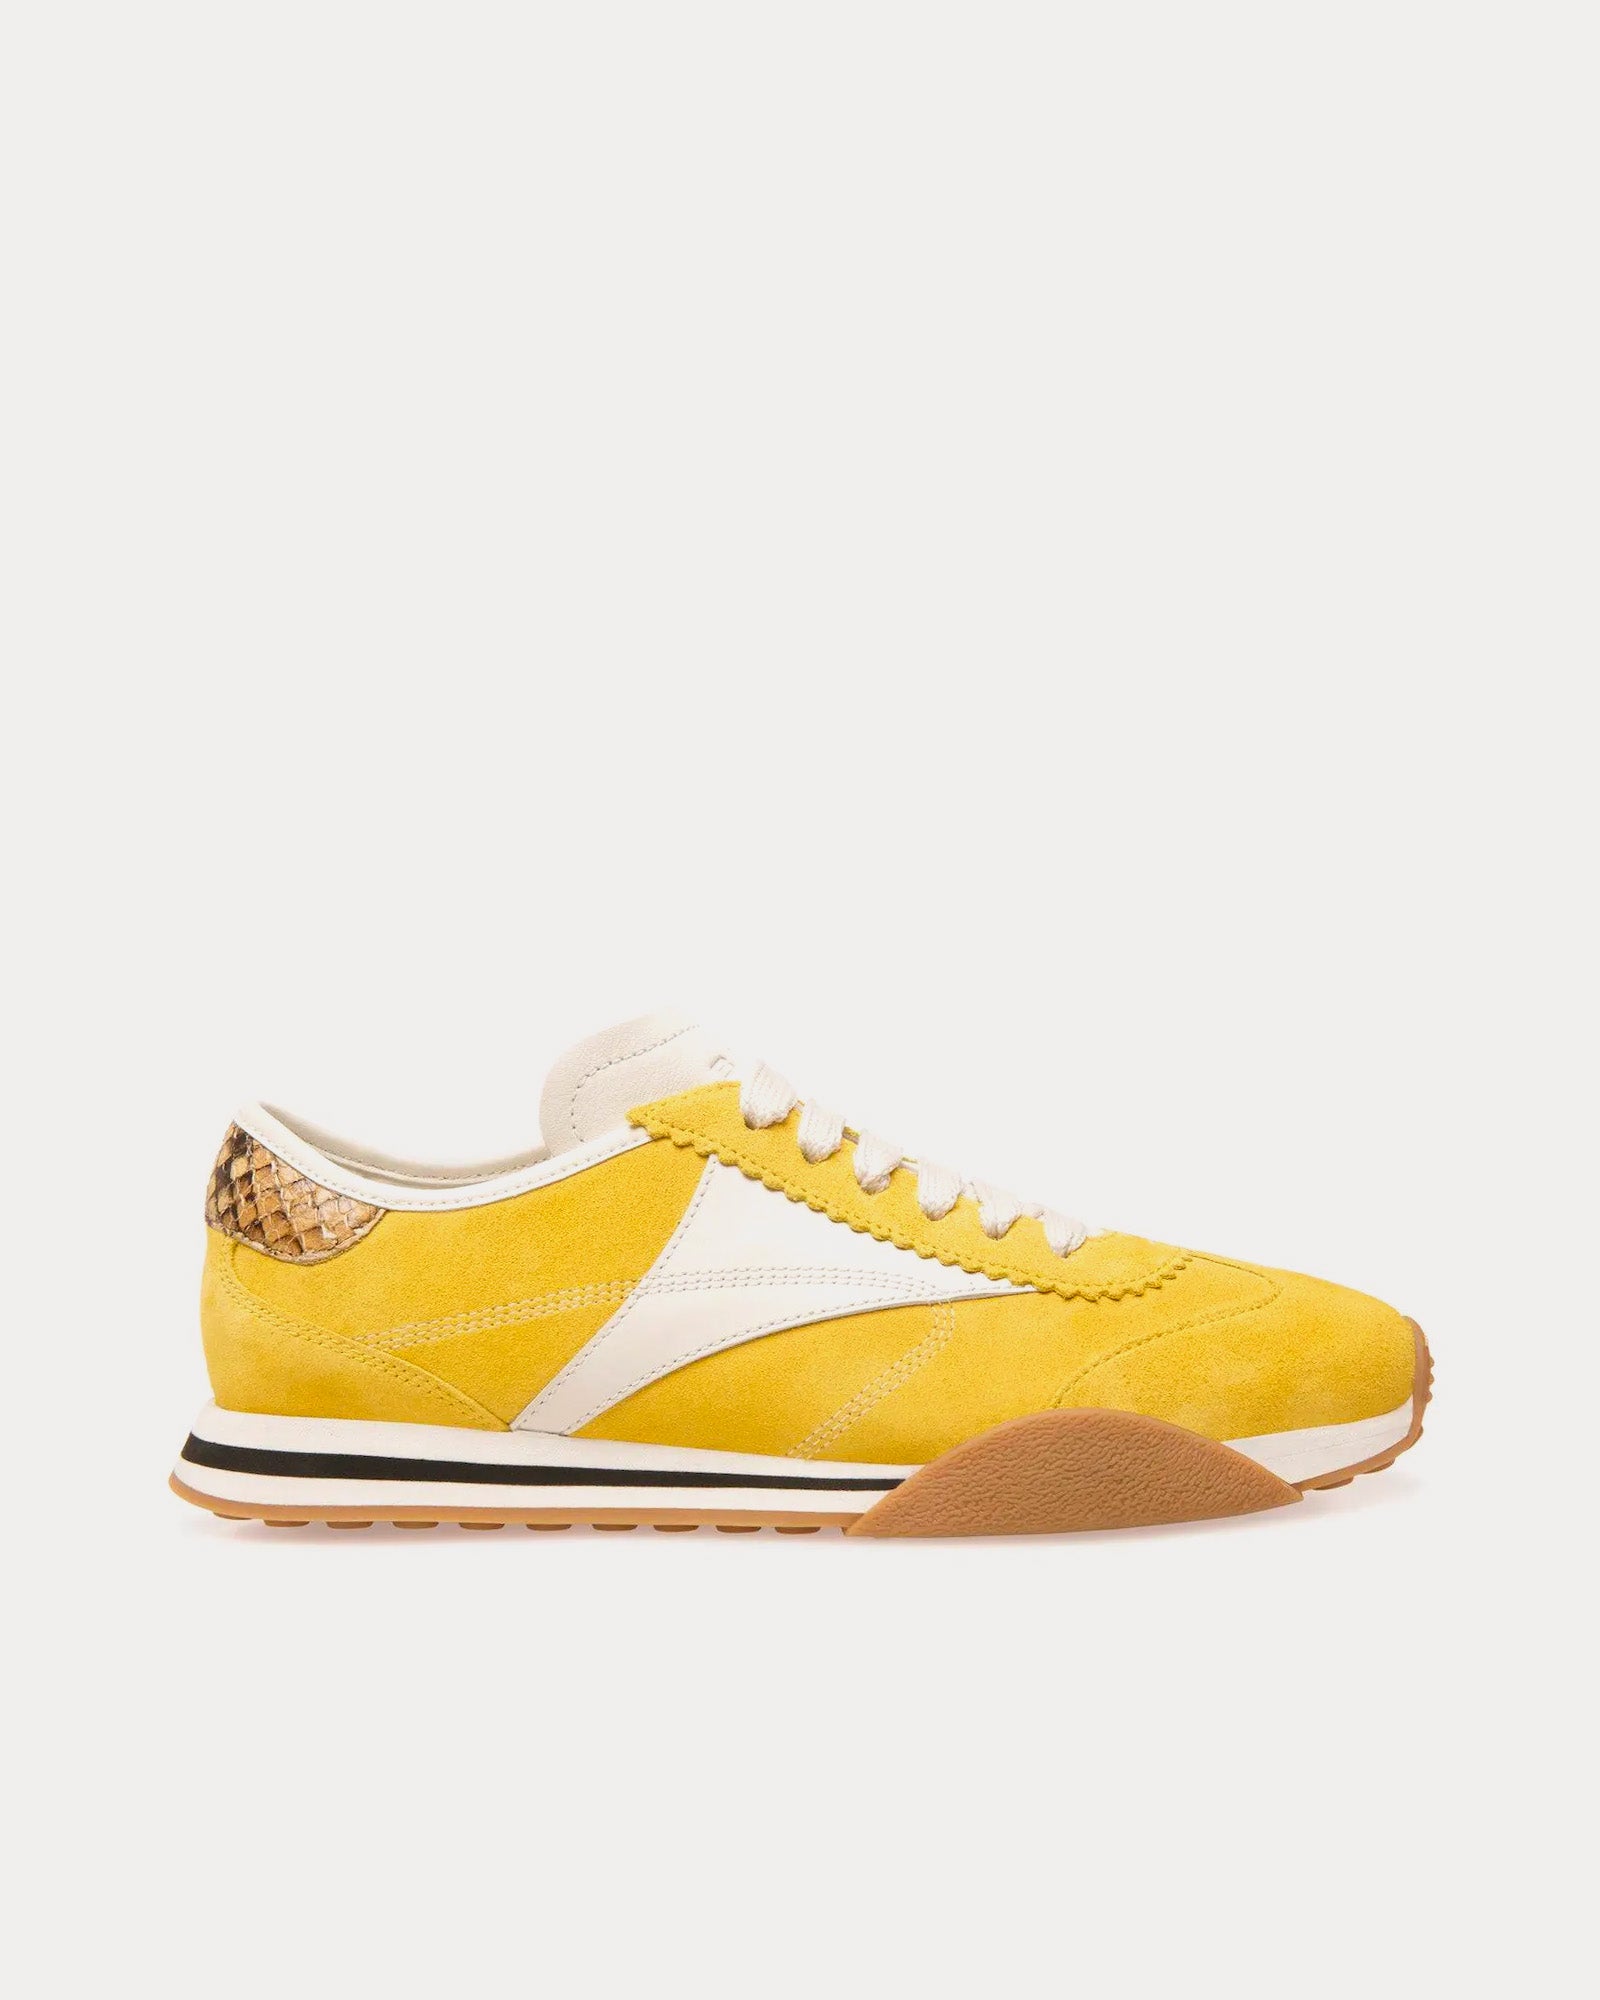 Bally - Sussex Leather Yellow / White Low Top Sneakers